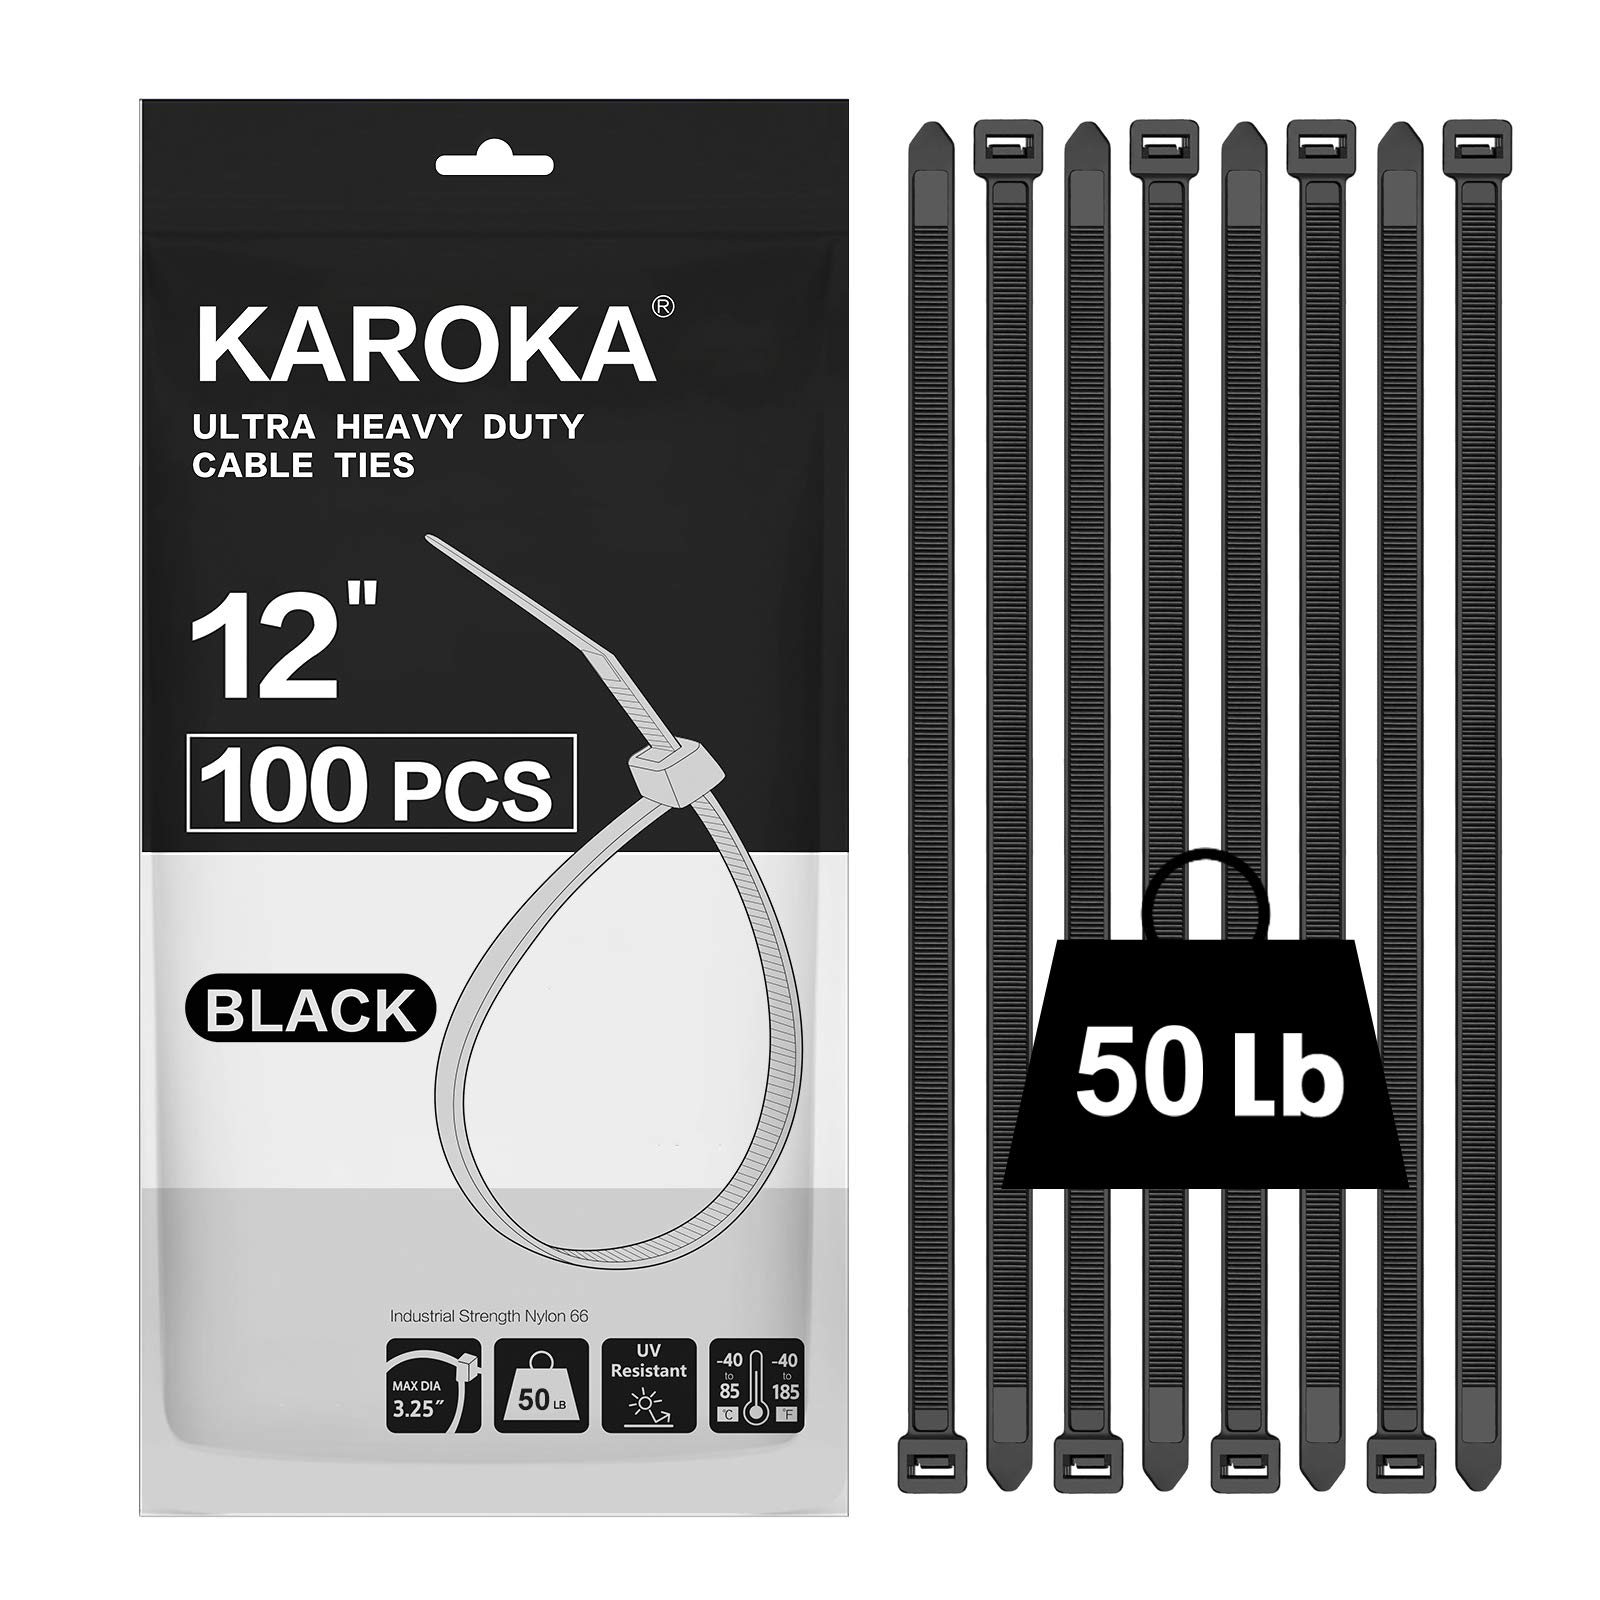 Zip Ties 12 inch (100 Pack), Black, 50 lb, UV Resistant Cable Ties for indoor and outdoor use, by Karoka